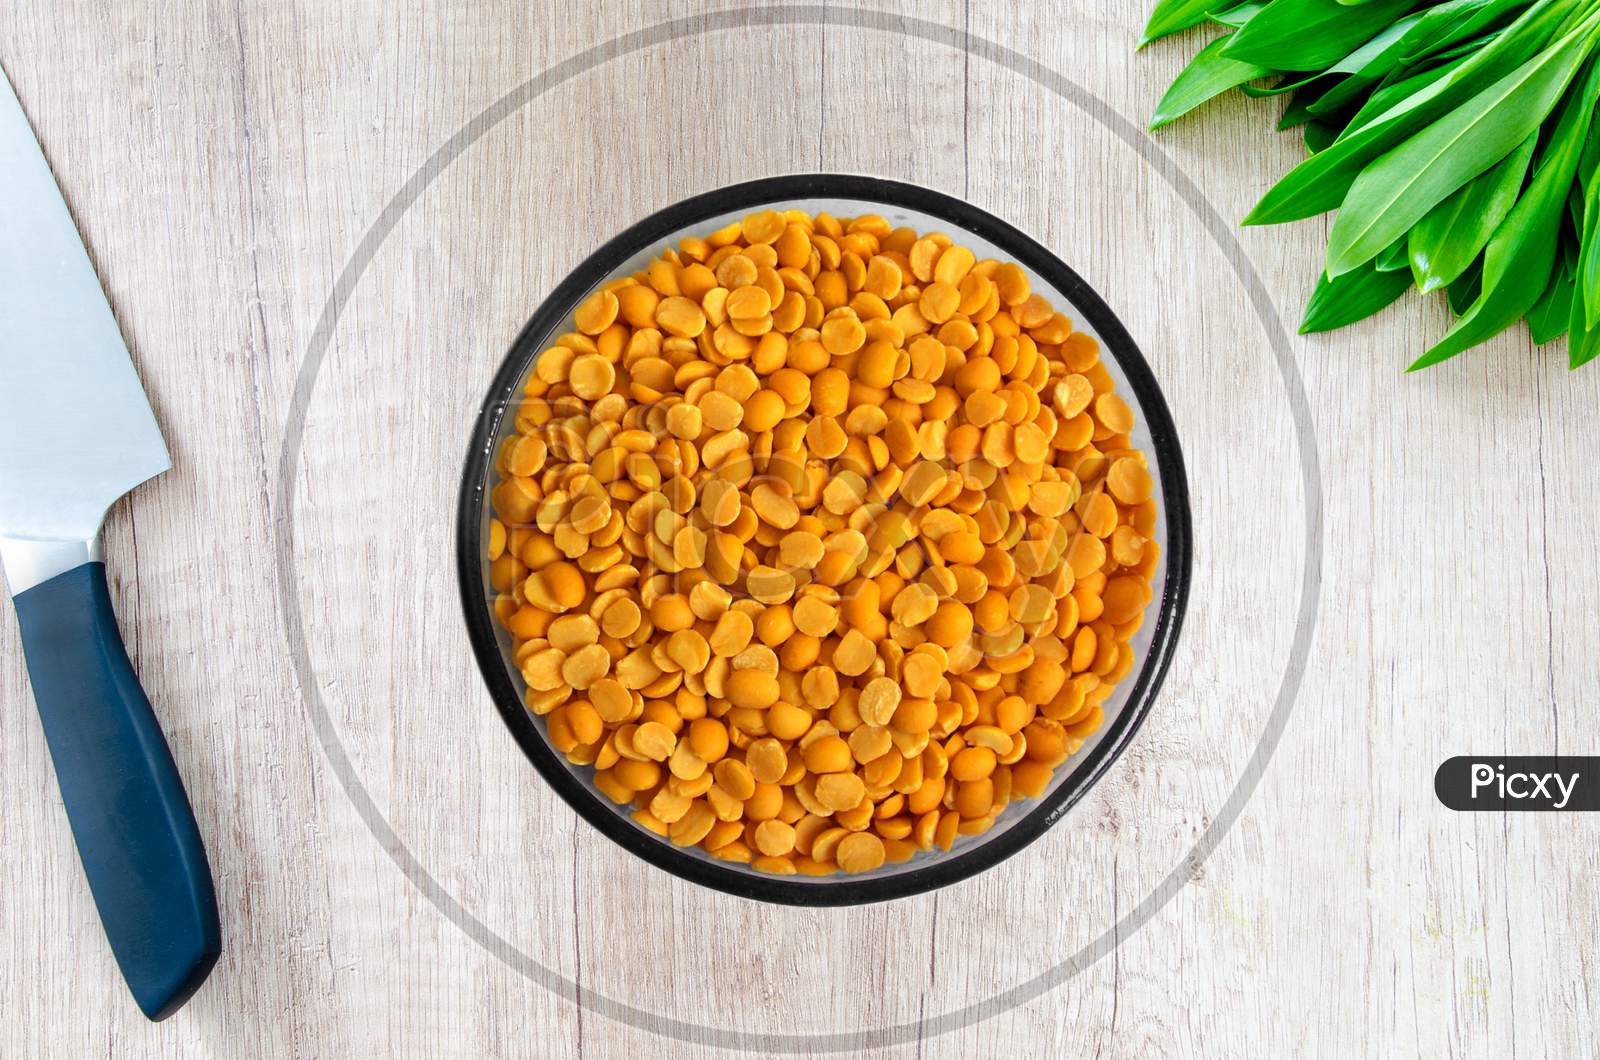 Yellow chopped peas in a bowal on wooden background.Yellow split chickpea peas boot chana dal lentil pulse bean on wooden background,top view.healthy food.